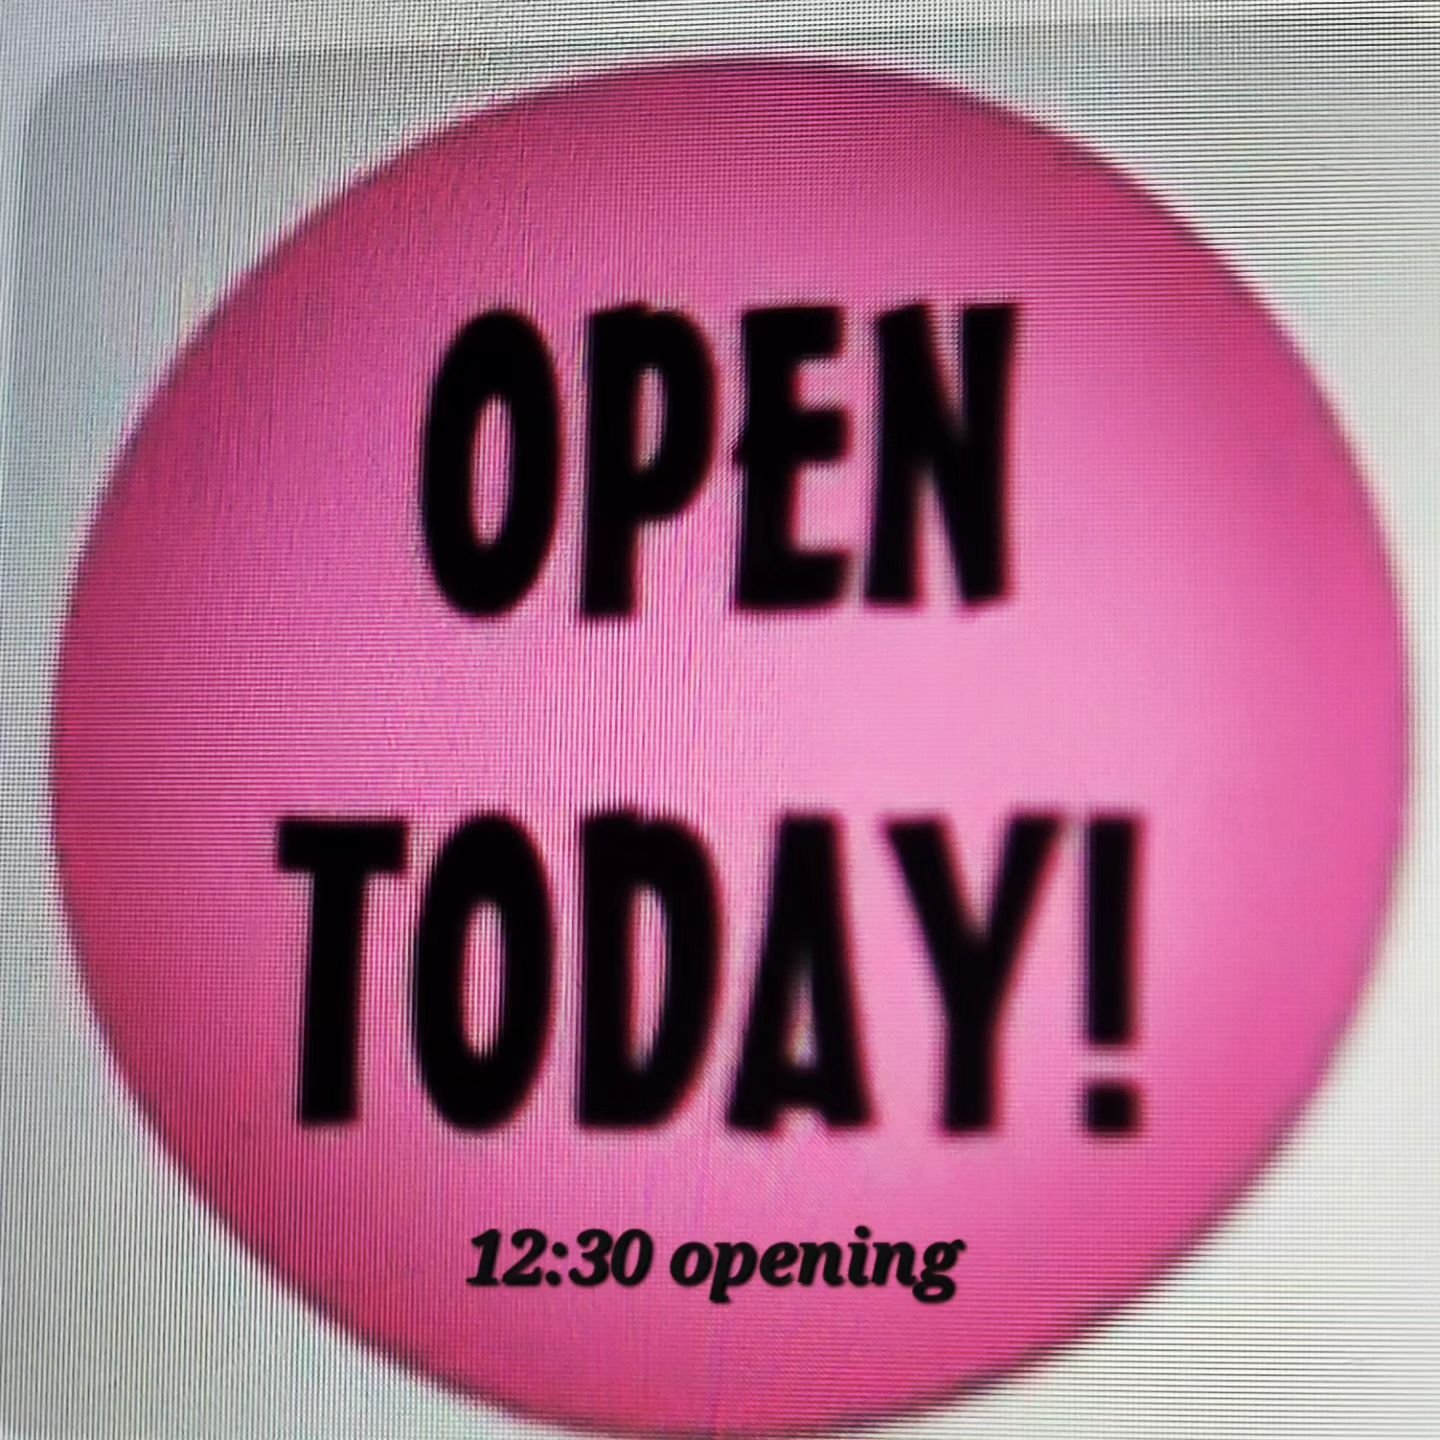 Opening today at station road and #7 in Porters Lake!